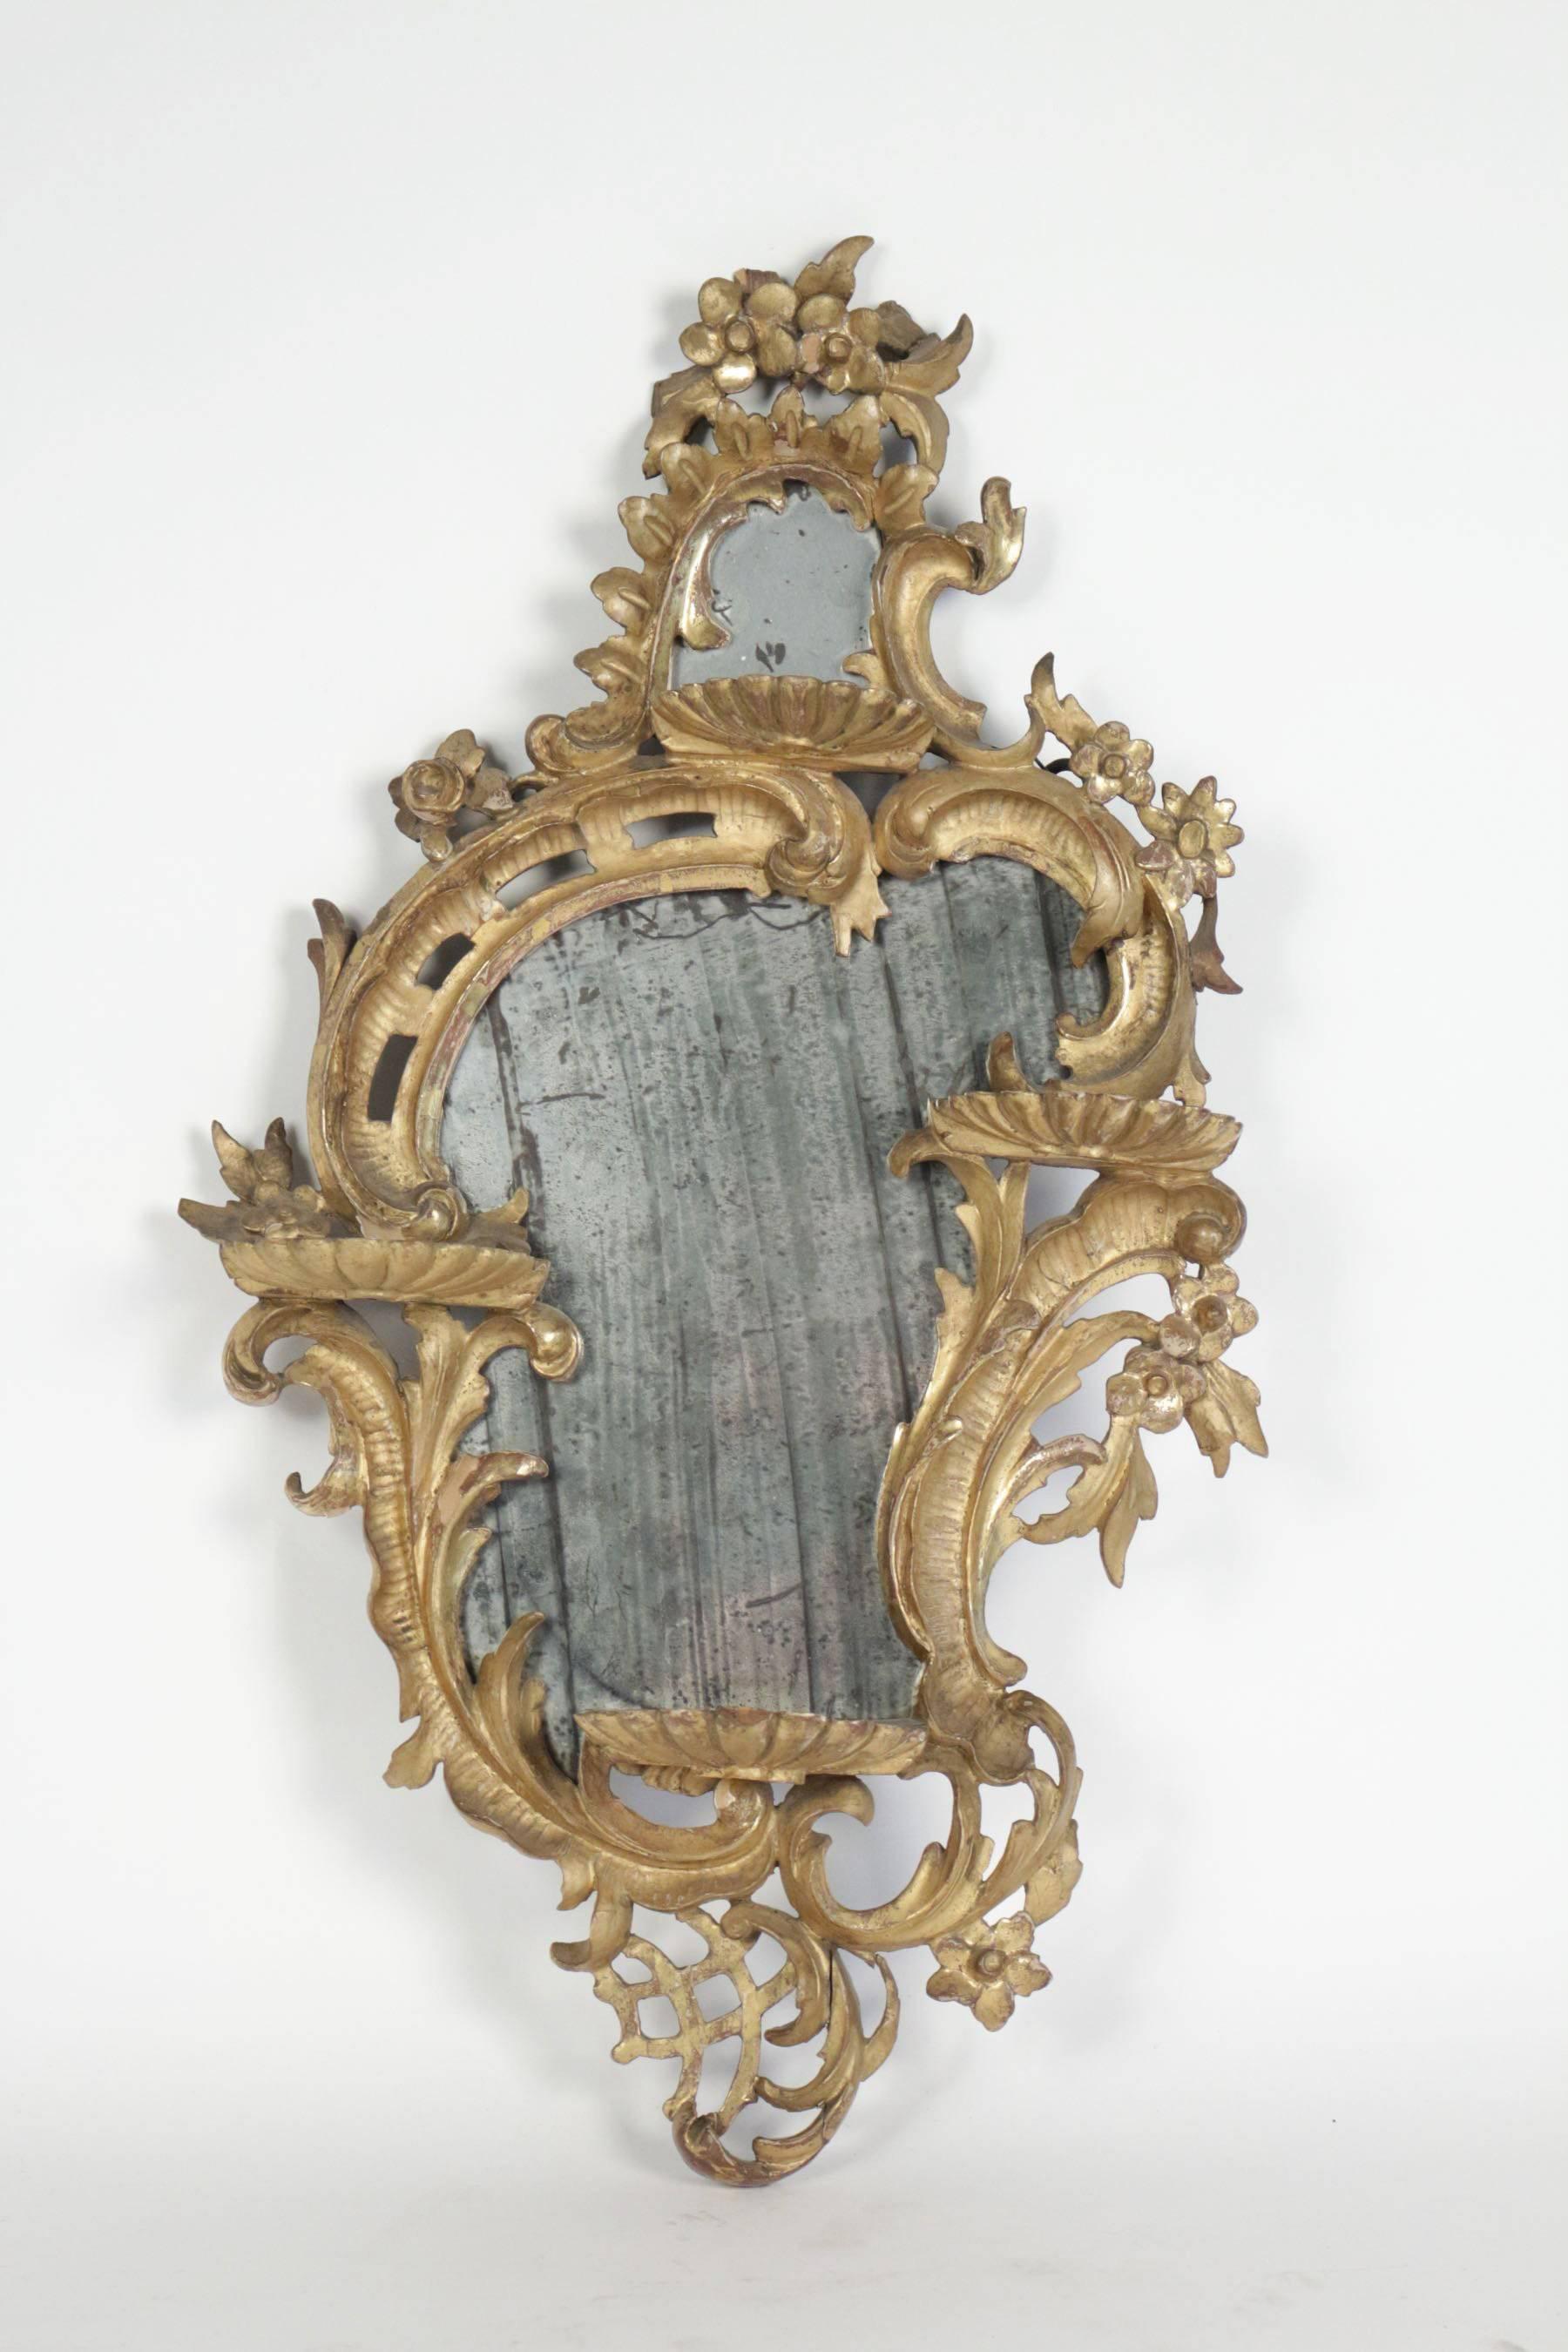 Lovely and very fine quality Italian original giltwood small mirror, richly hand-carved and decorated with openwork scrolling, shells and flowers.
Original mercury glass.

Italian work early 19th century in the classical Louis XV